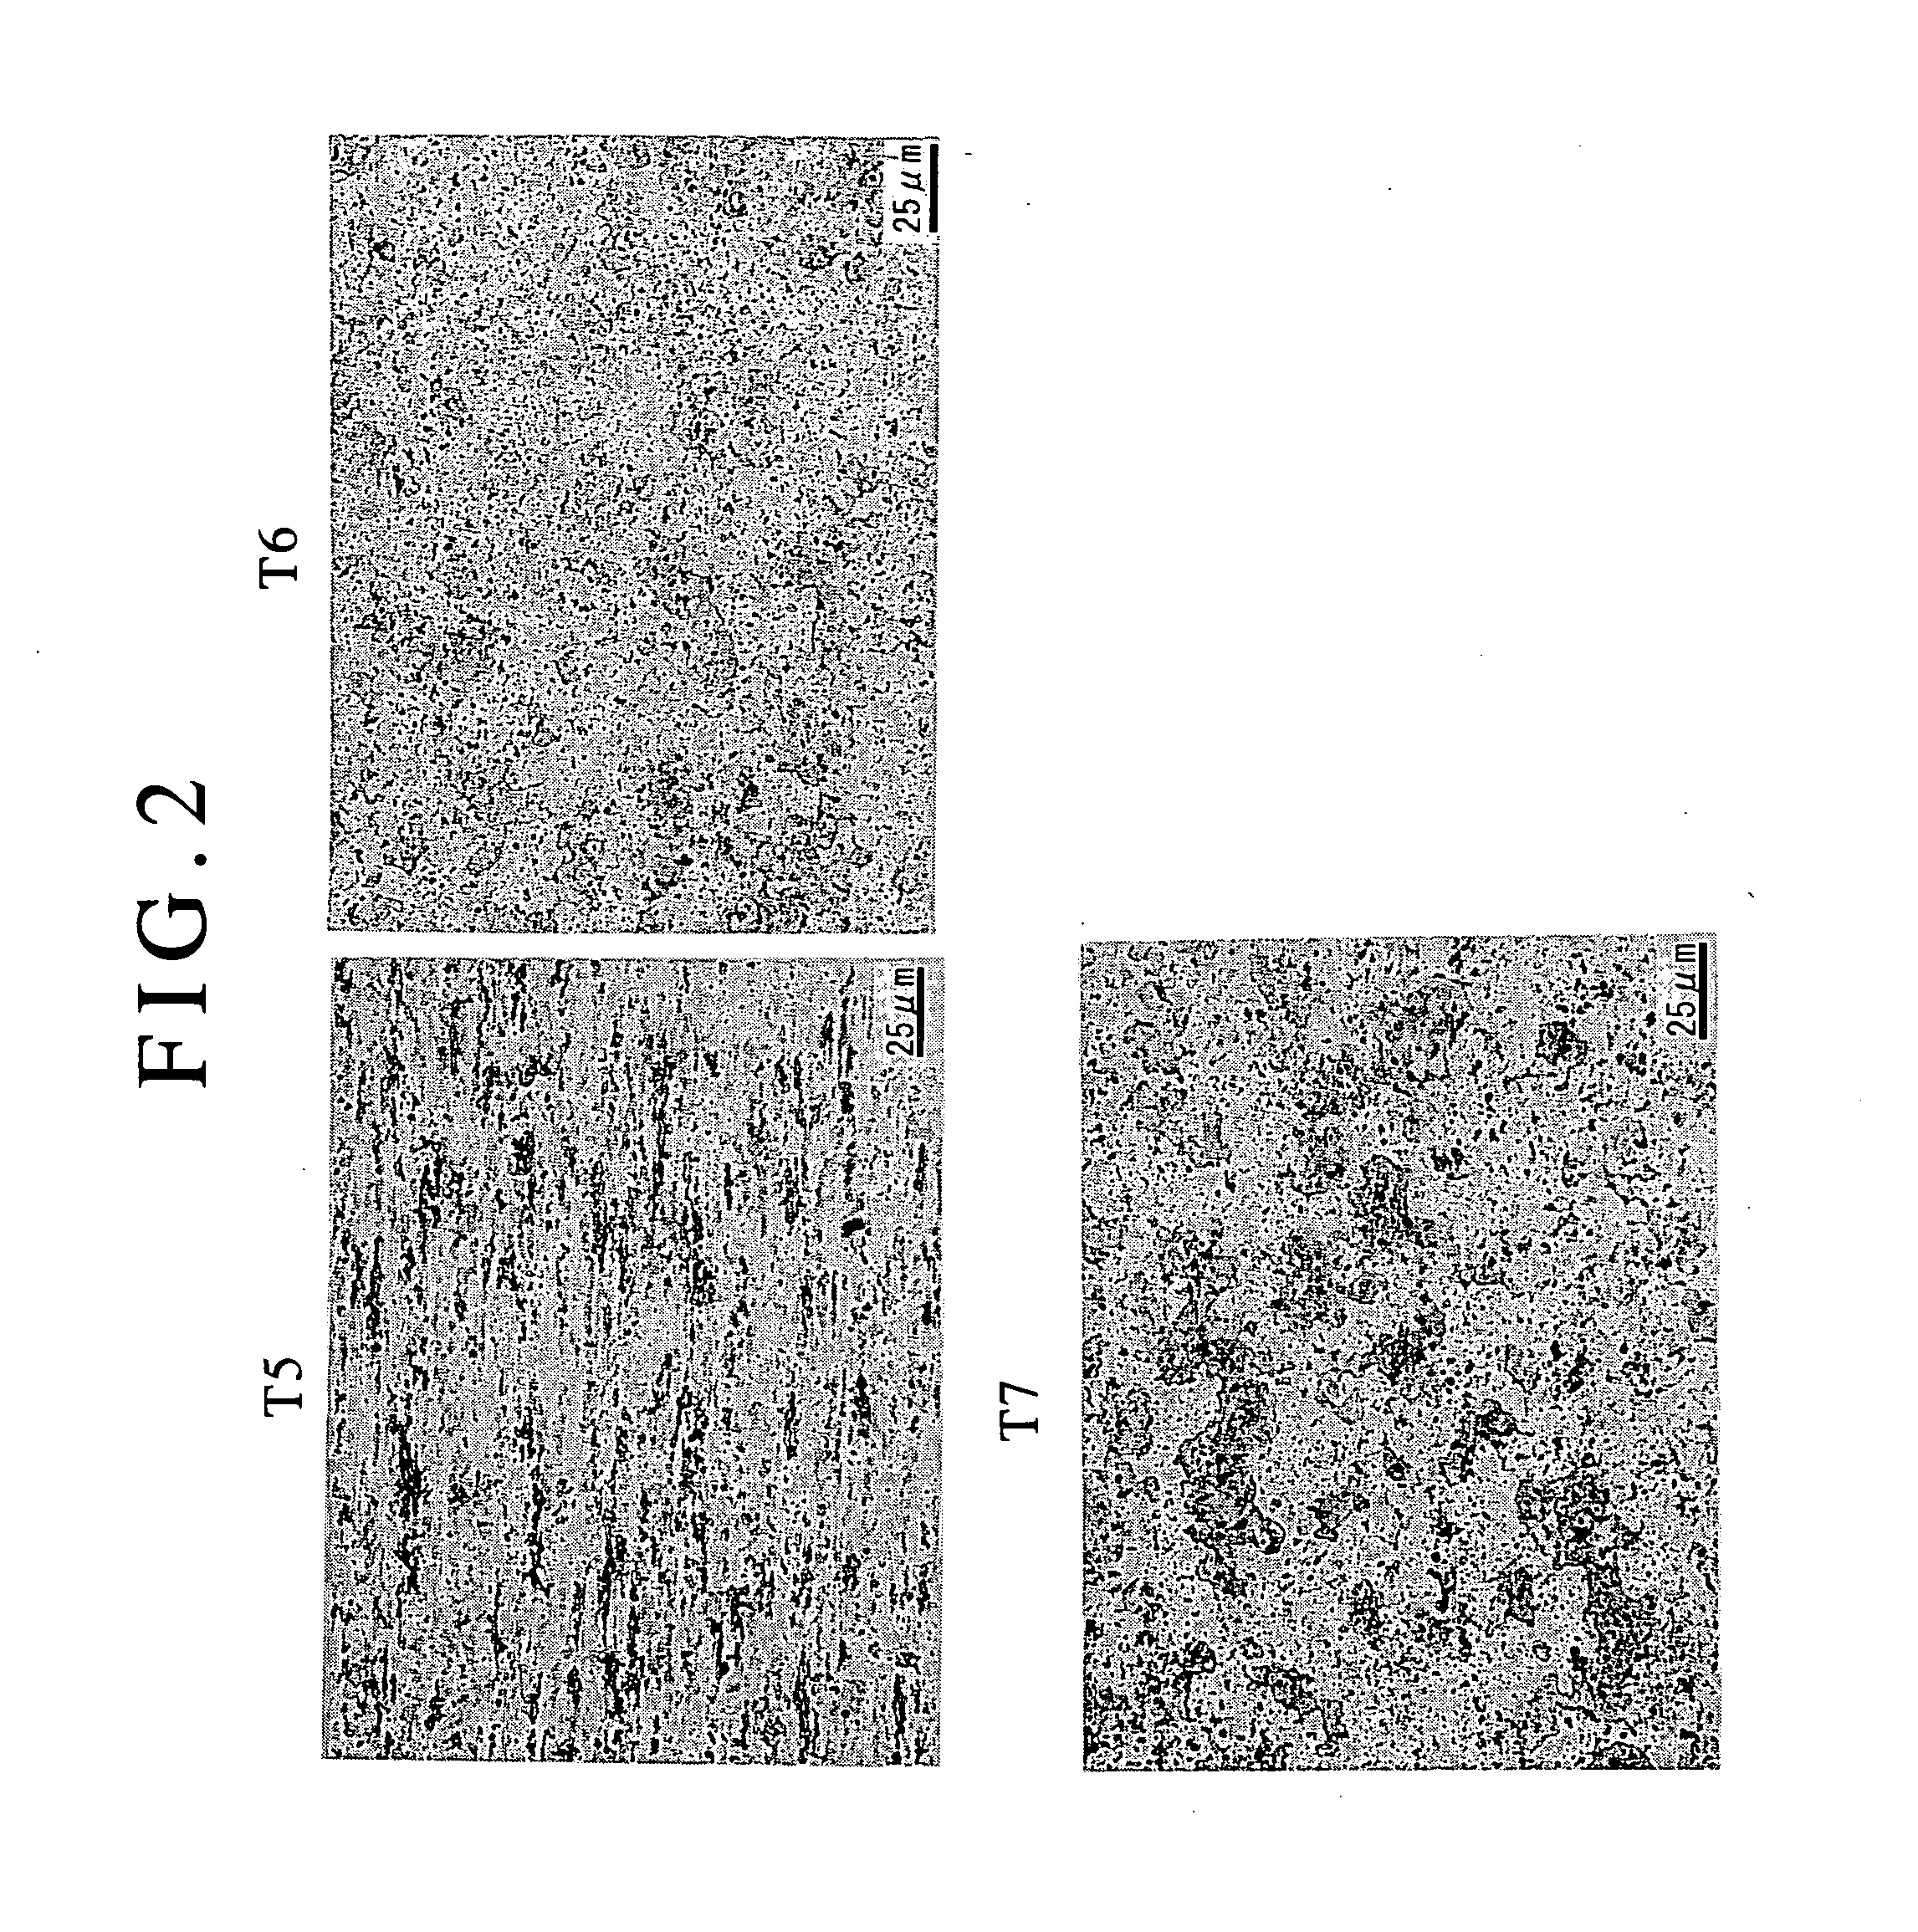 Method for producing dispersed oxide reinforced ferritic steel having coarse grain structure and being excellent in high temperature creep strength